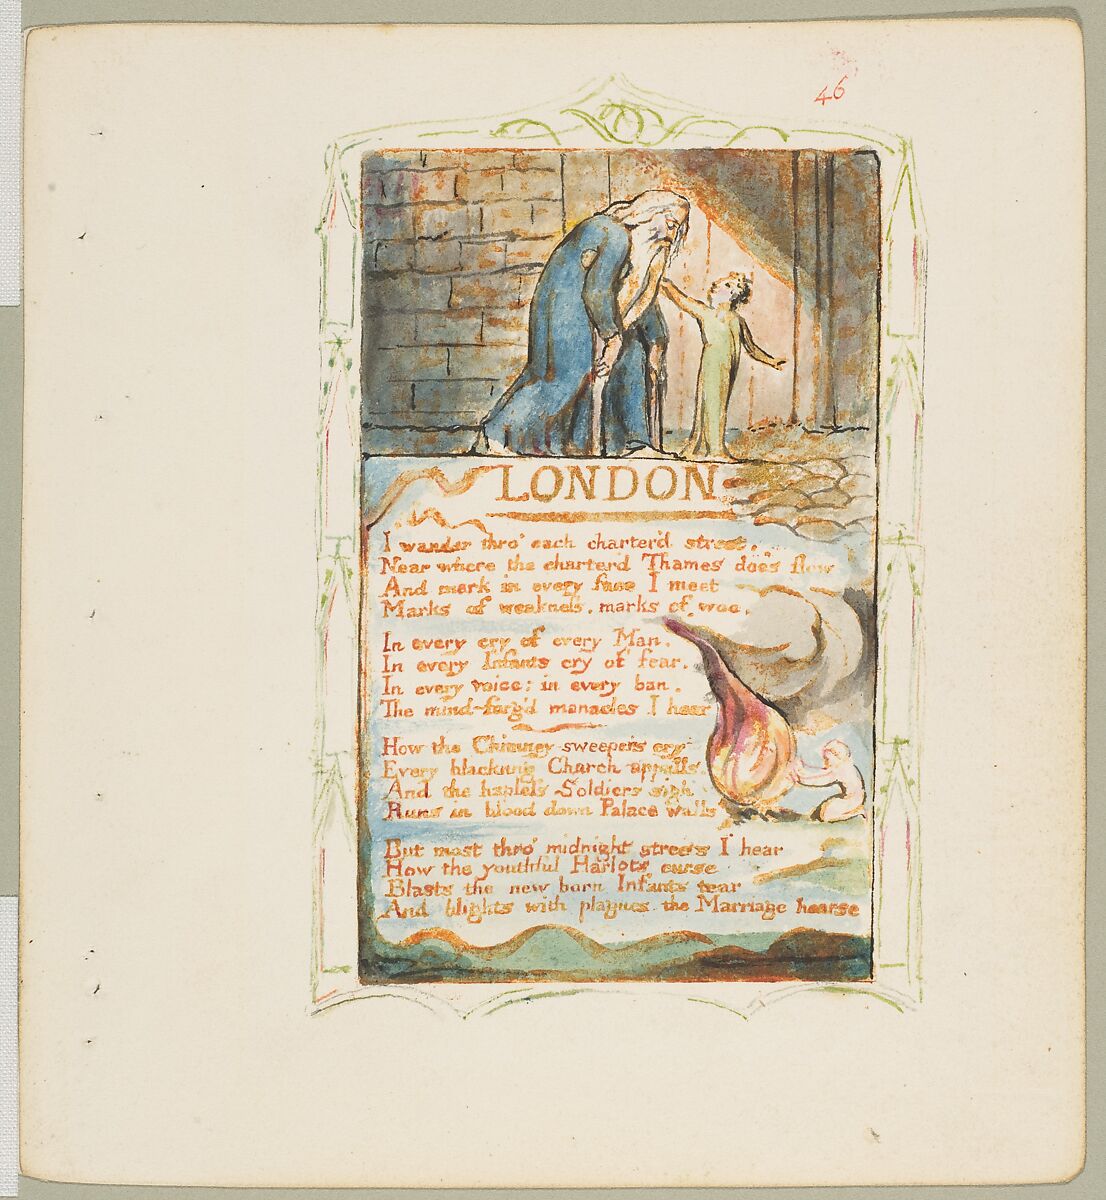 Songs of Experience: London, William Blake, Relief etching printed in orange-brown ink and hand-colored with watercolor and shell gold